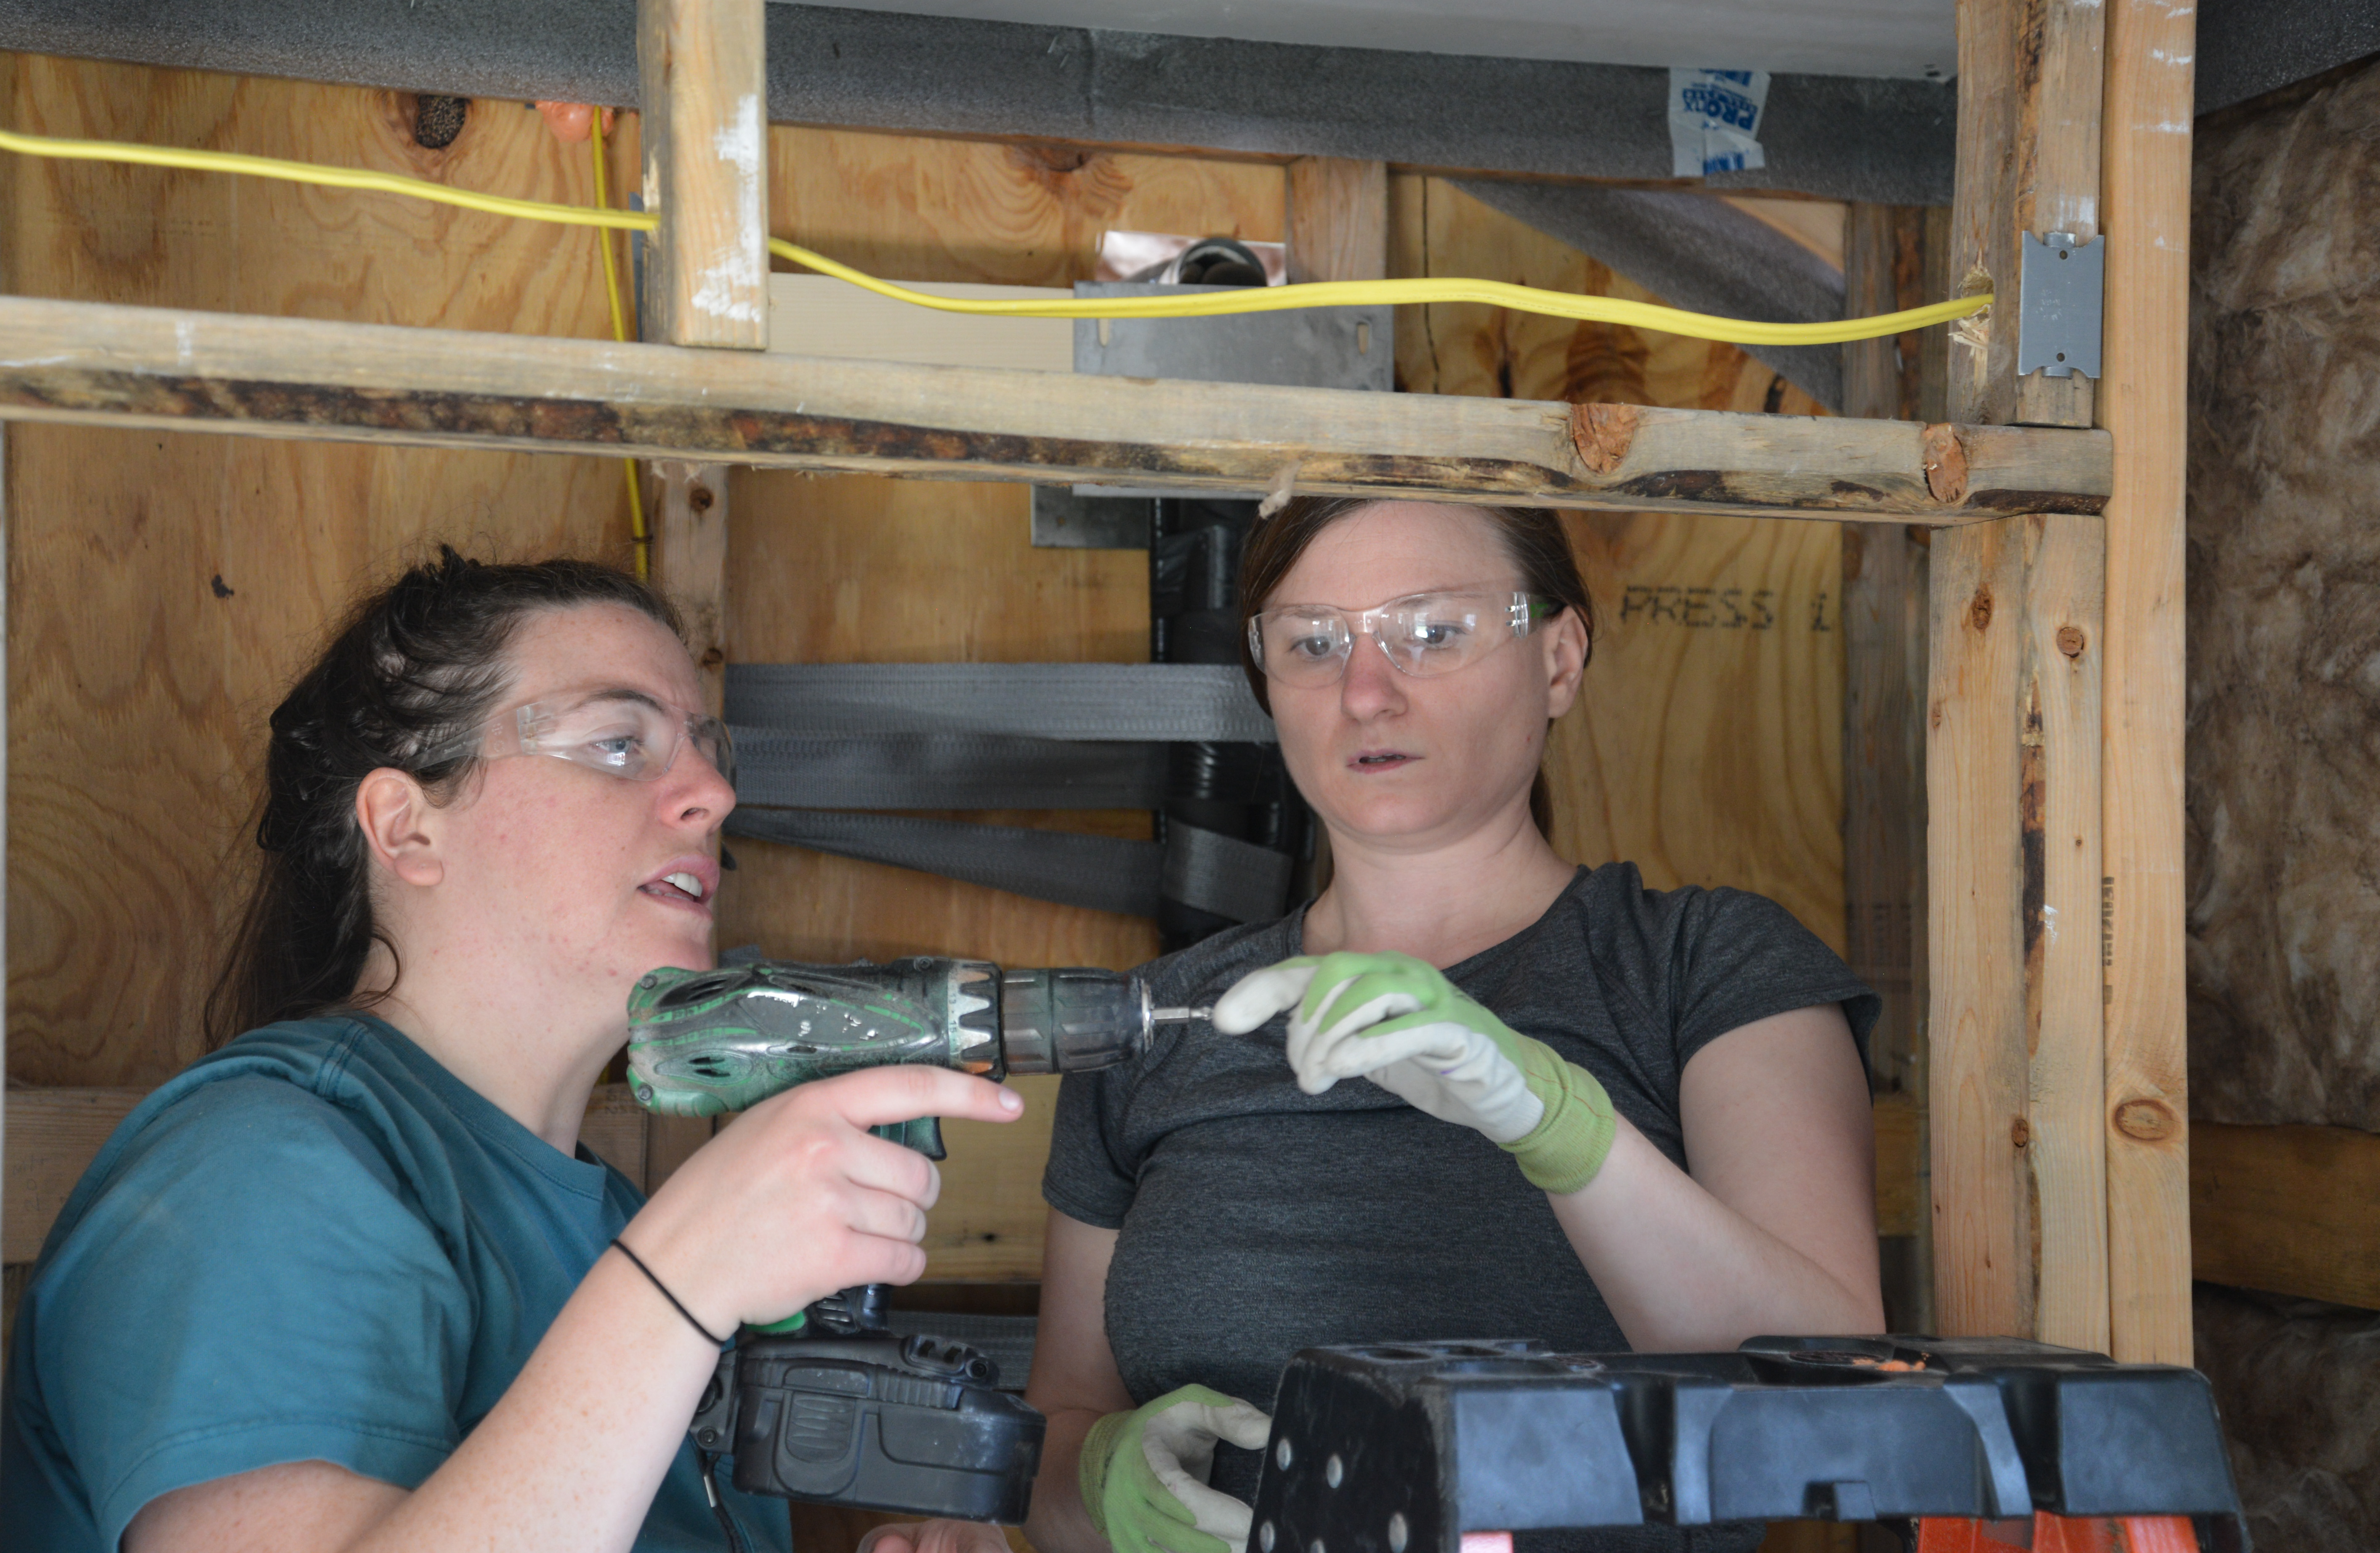 two people holding power tools working on building a house